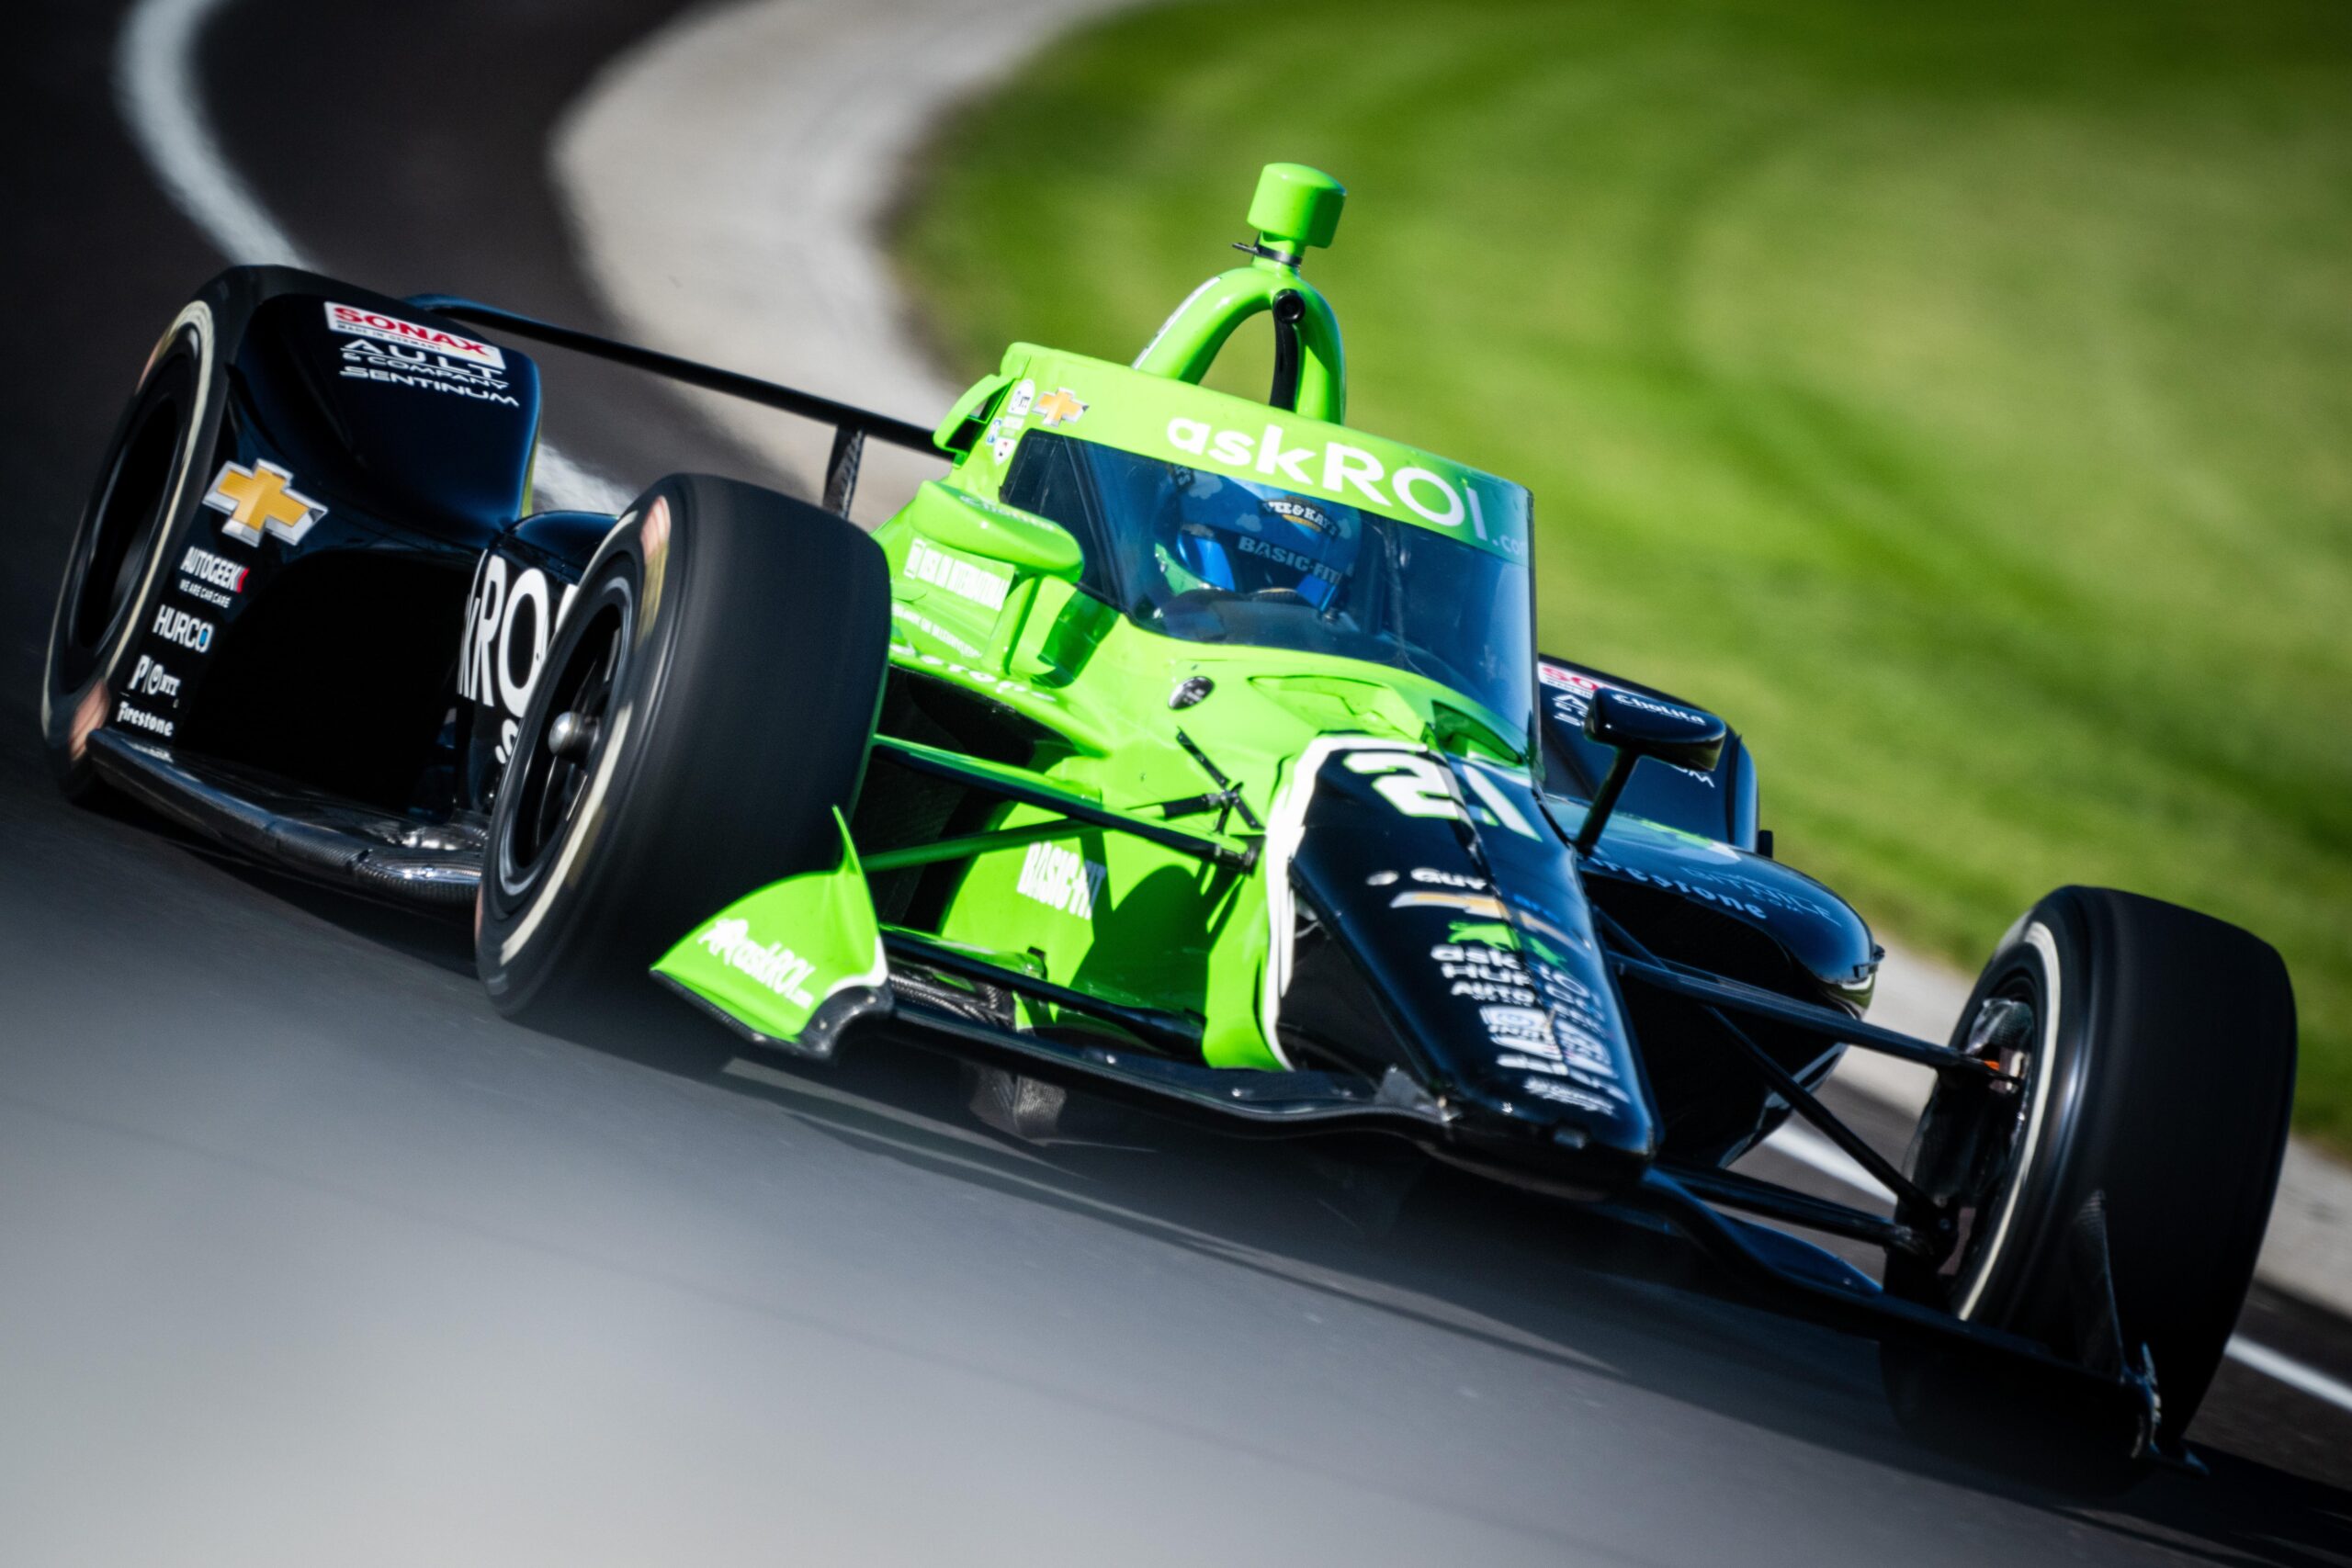 Rinus VeeKay’s wild first day of Indy 500 qualifying